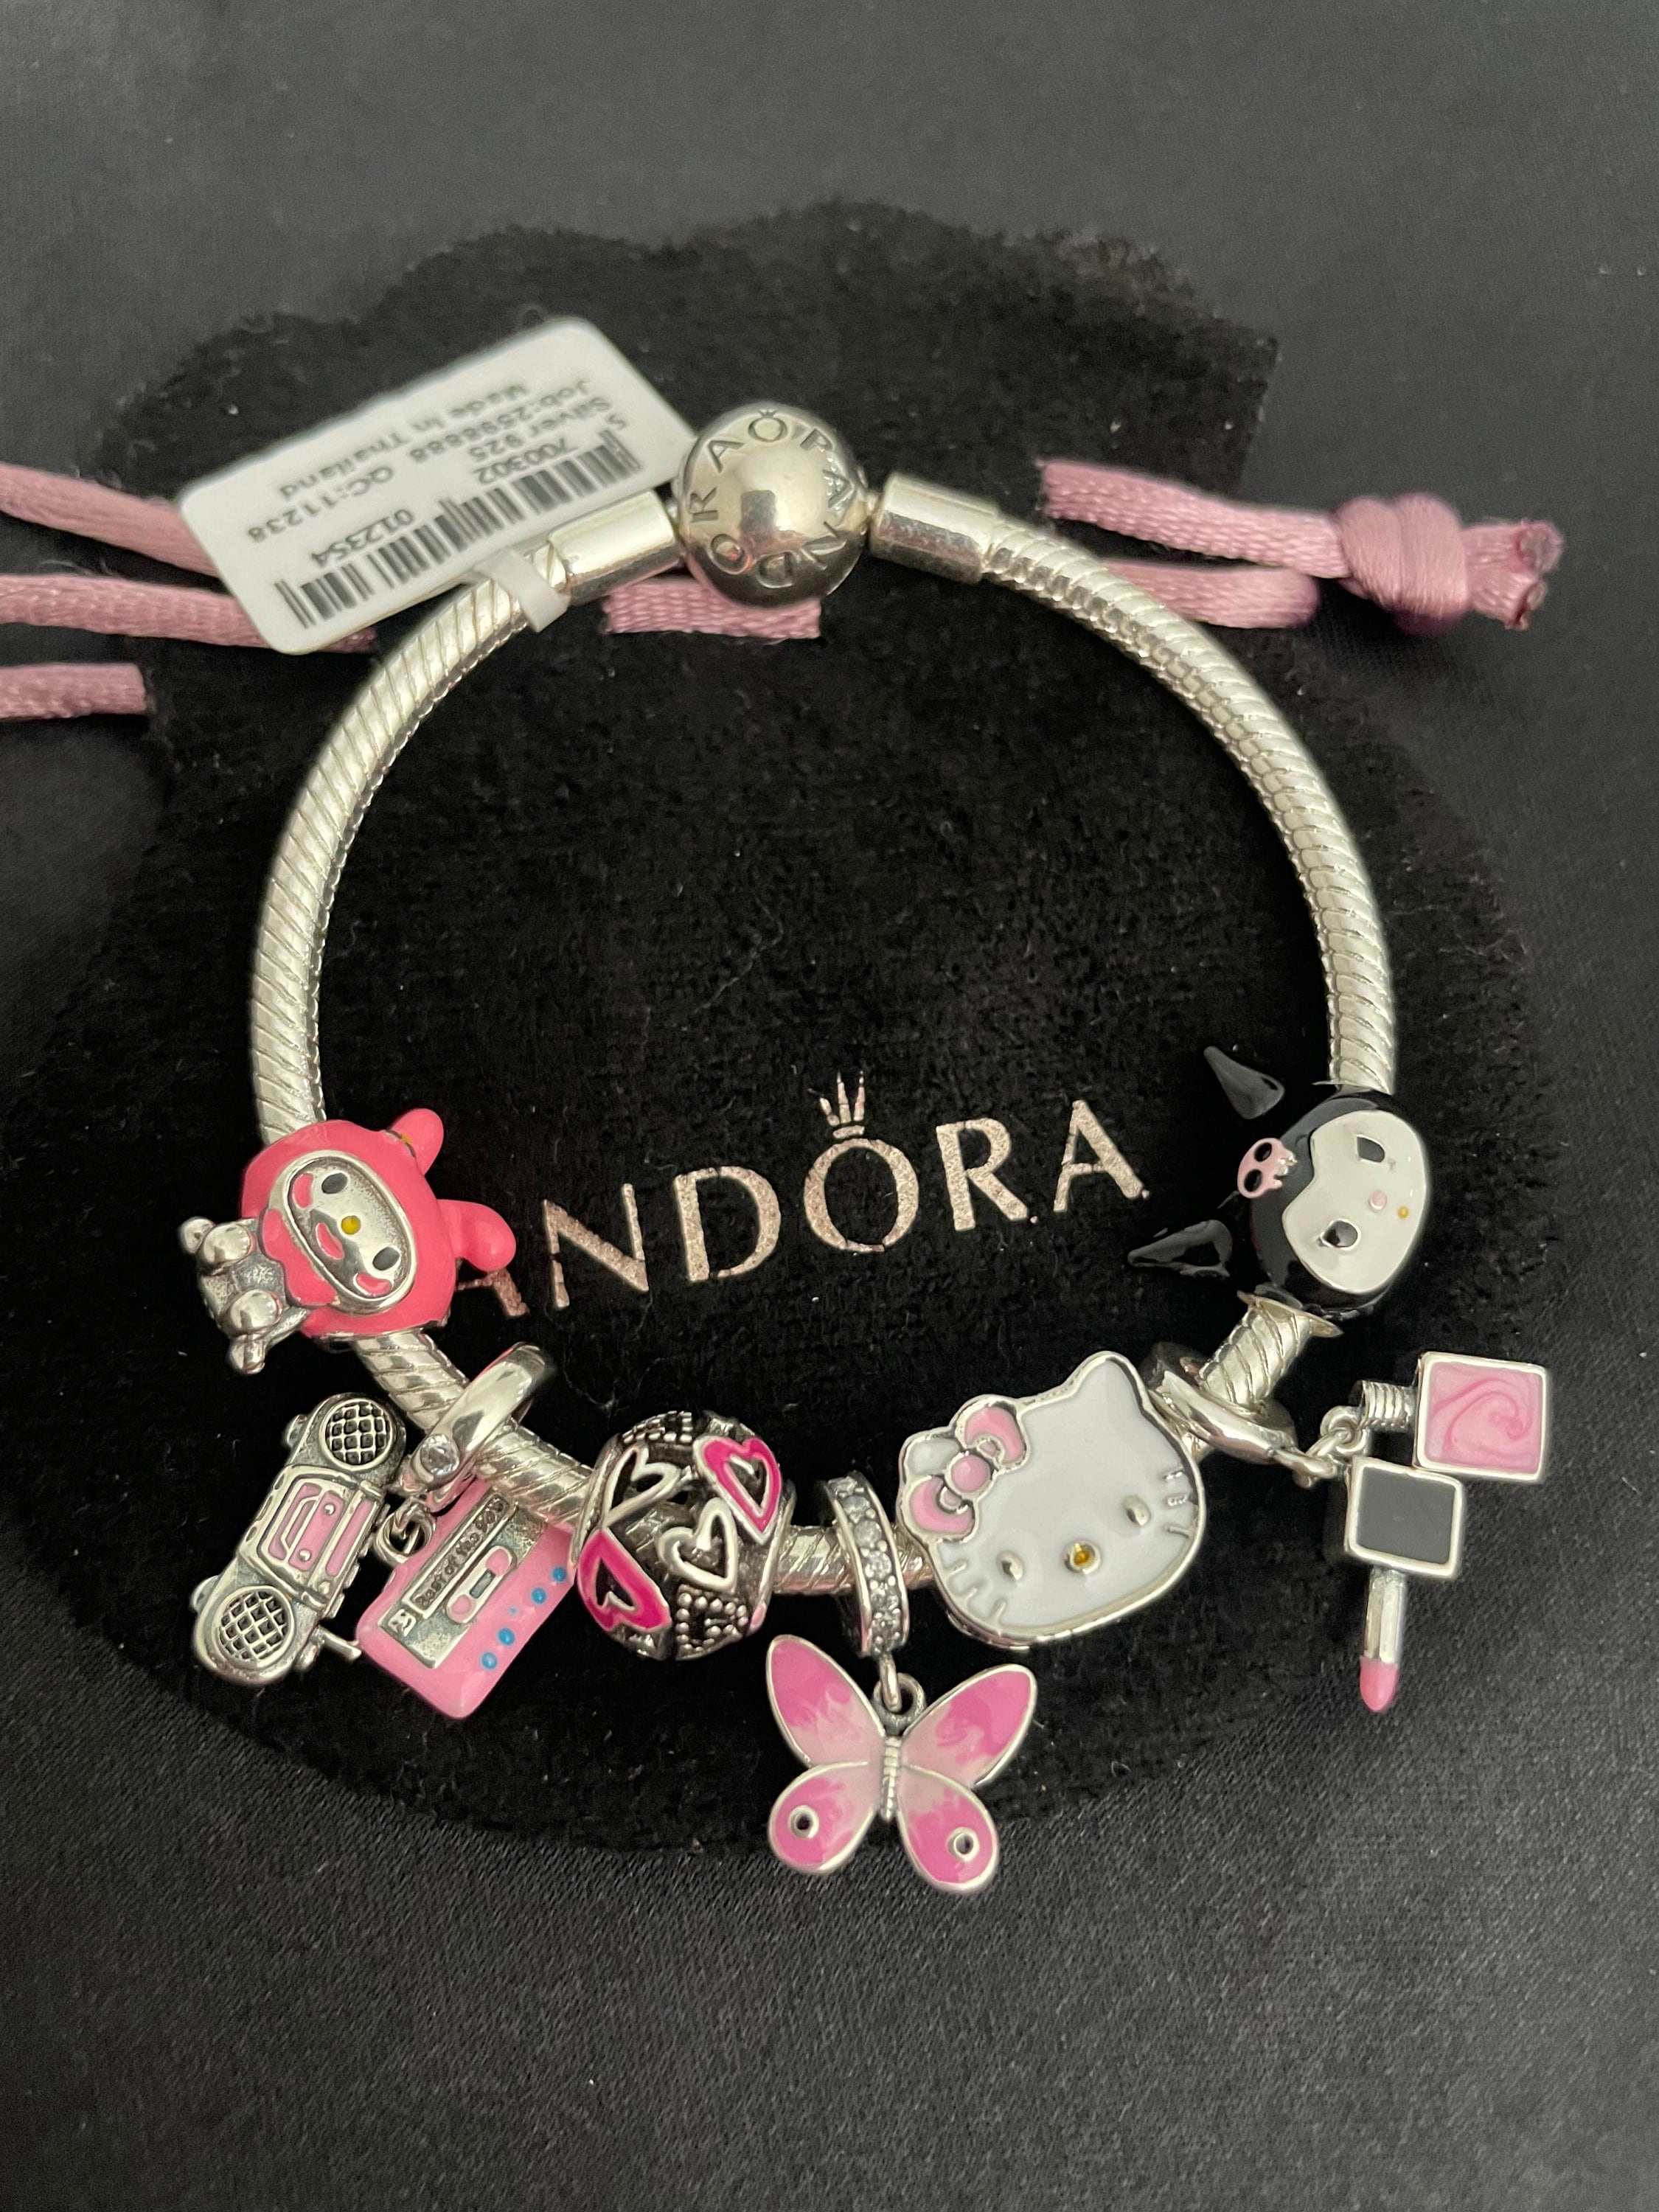 Pandora Bracelet With Pink and Black Character Themed Charms 